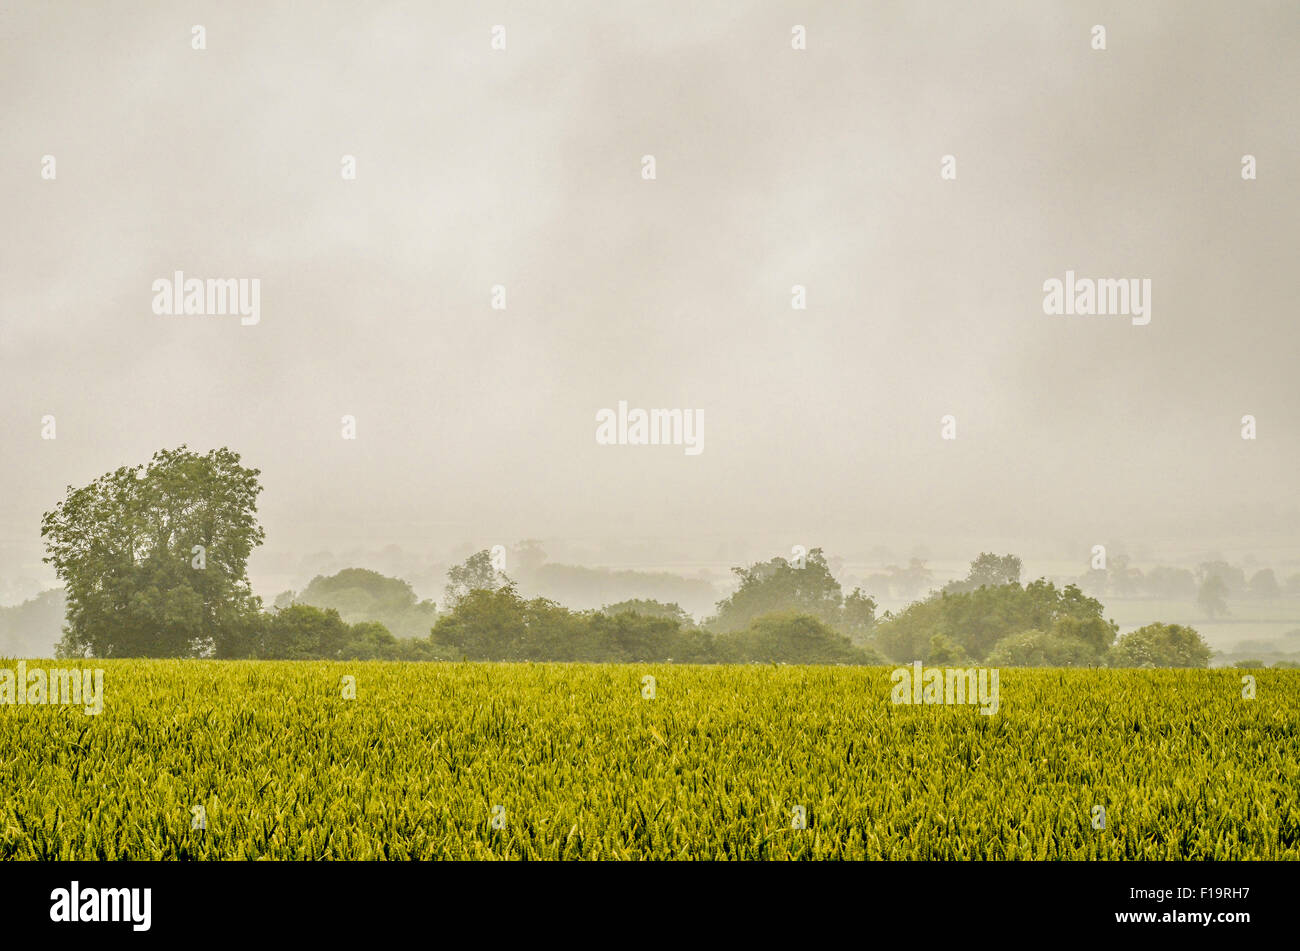 Green fields of England concept. Dark and broody rain-sodden day hanging over an unripe wheat crop. For food security / growing food, gloomy outlook. Stock Photo